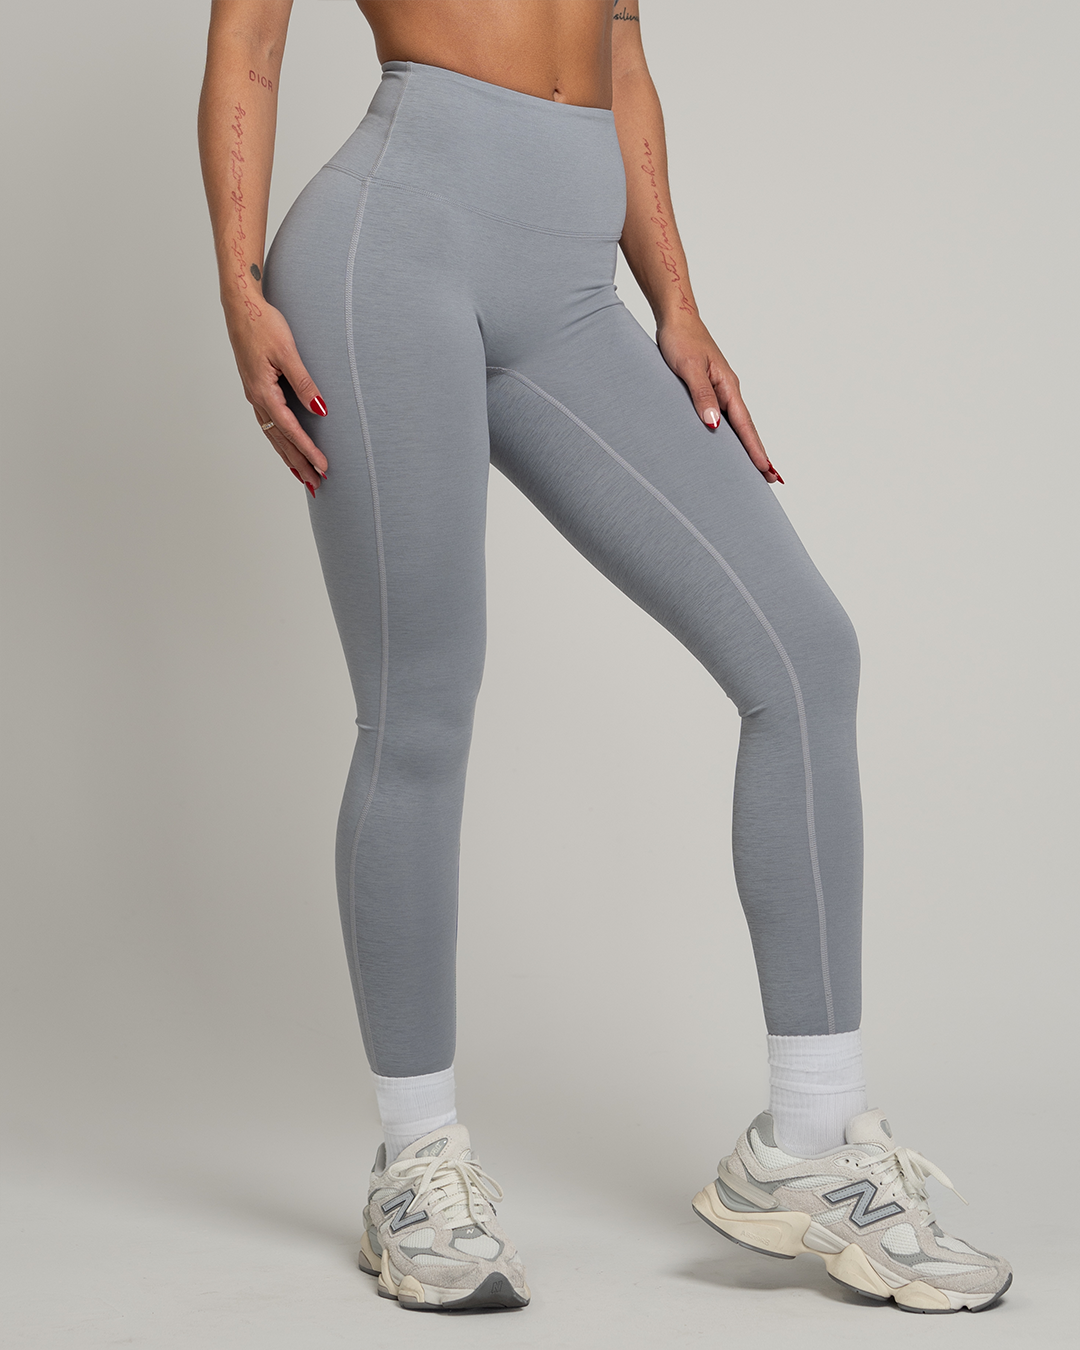 Booty scrunch legging - The best products with free shipping